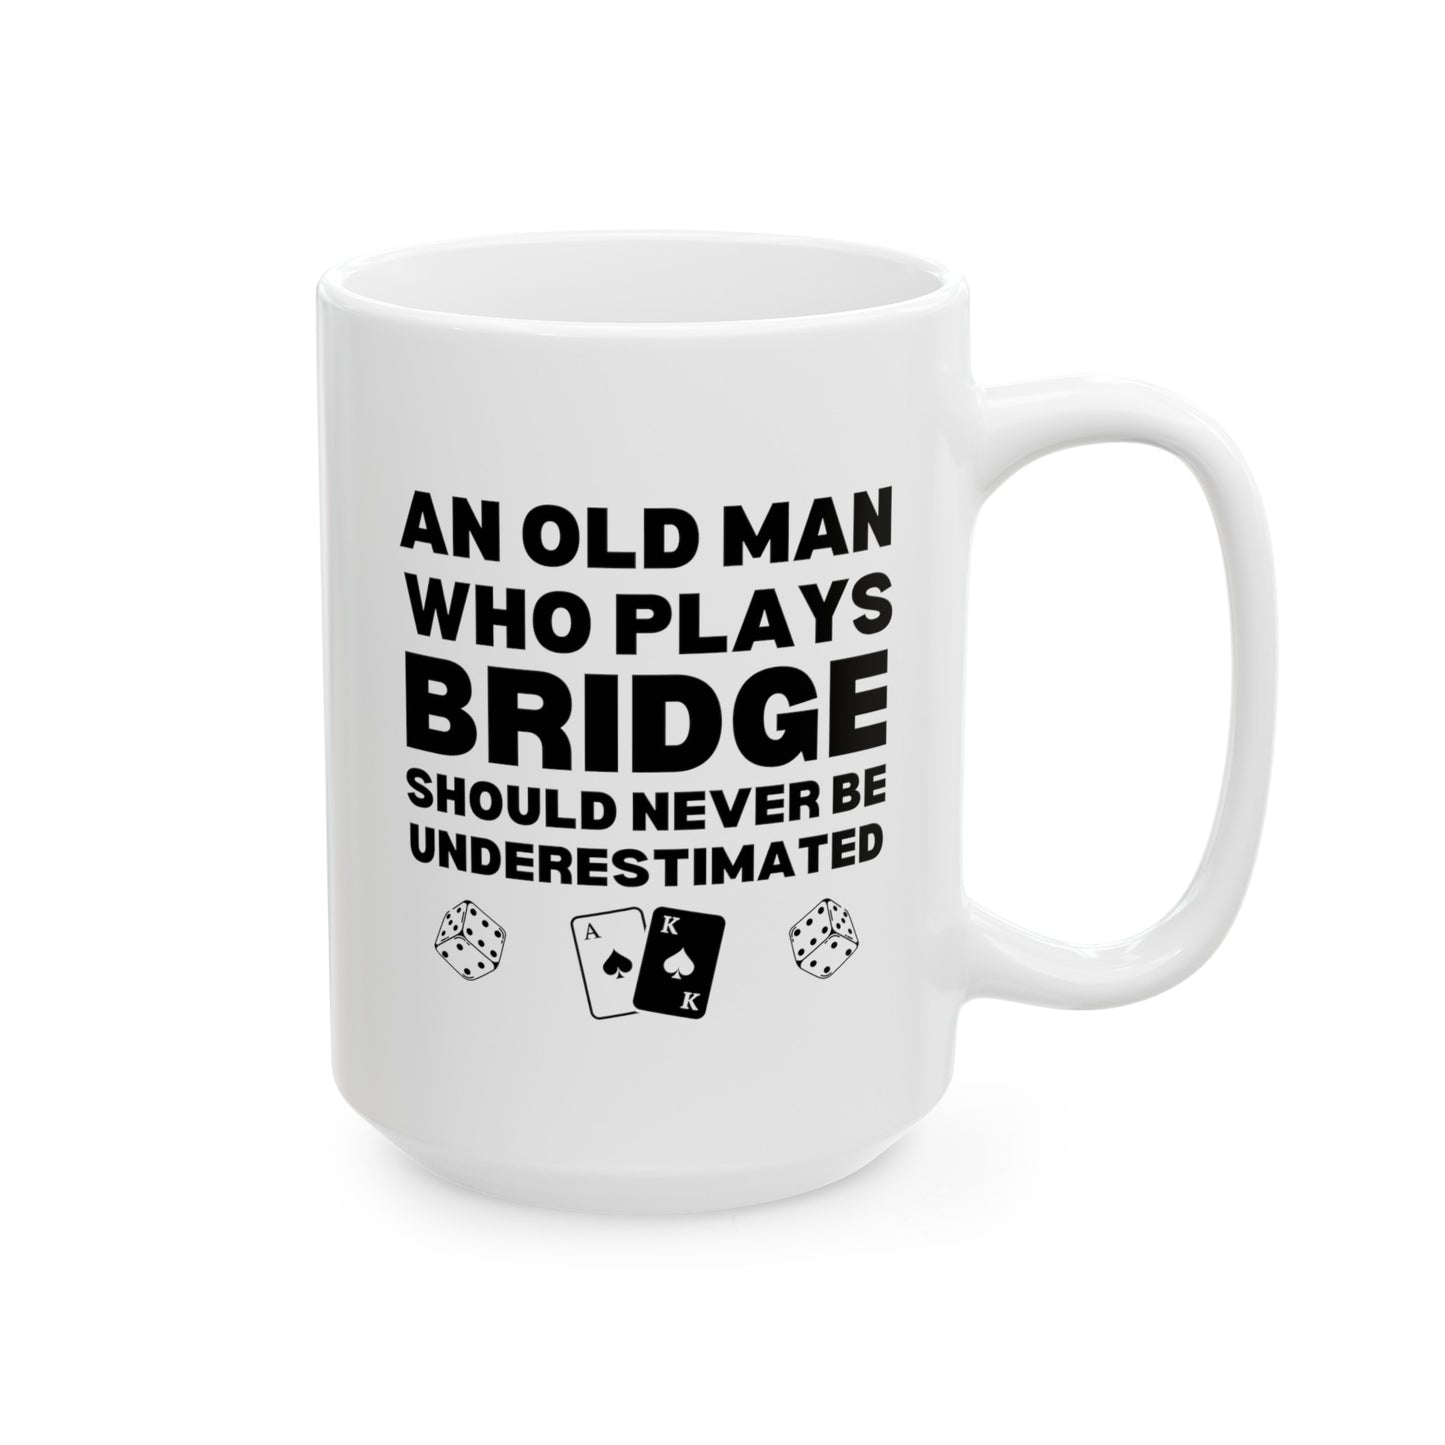 An Old Man Who Plays Bridge Should Never Be Underestimated 15oz white funny large coffee mug gift for player card game deck dice waveywares wavey wares wavywares wavy wares